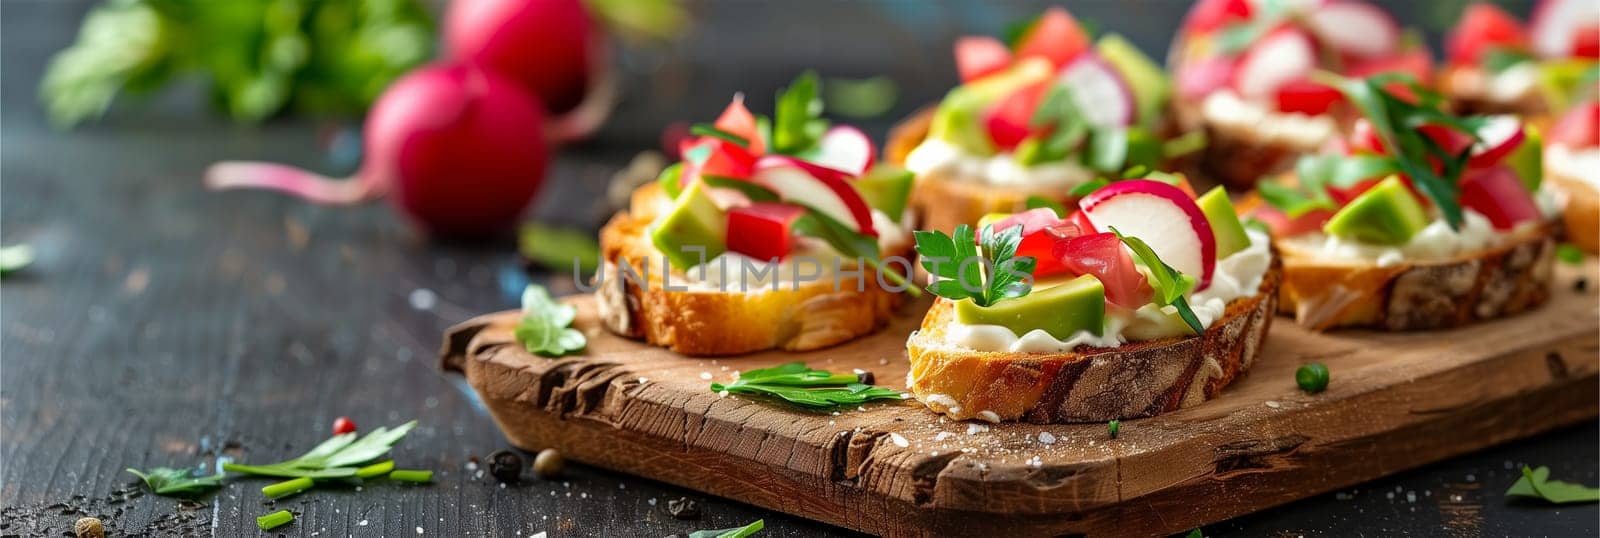 Wooden Cutting Board With Mini Sandwiches by Sd28DimoN_1976